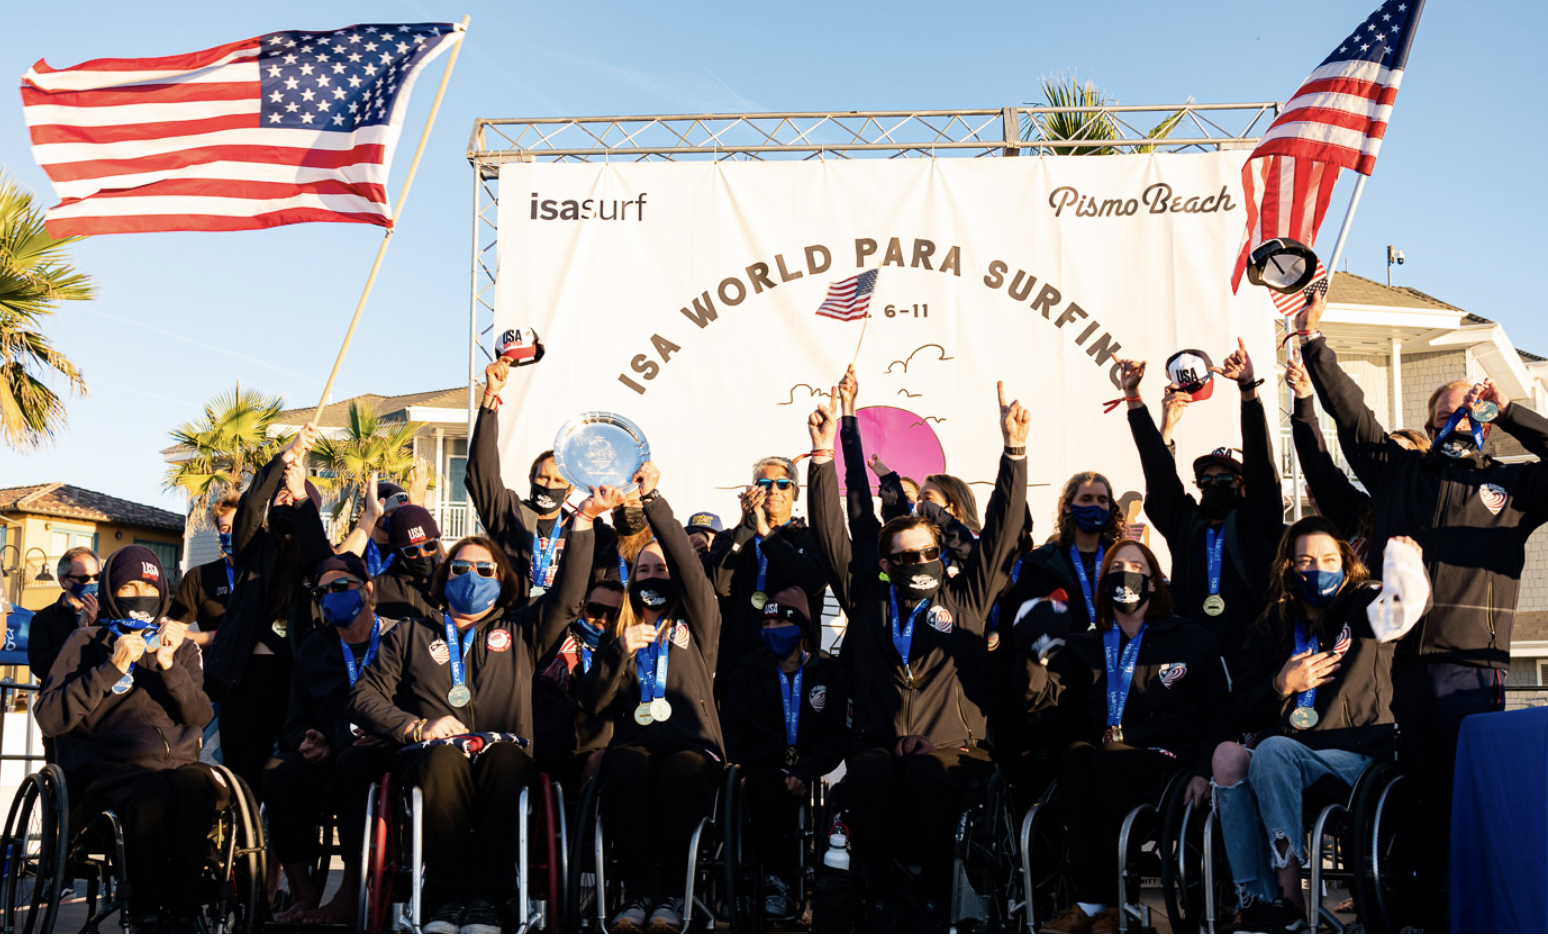 United States seal team title at World Para Surfing Championships